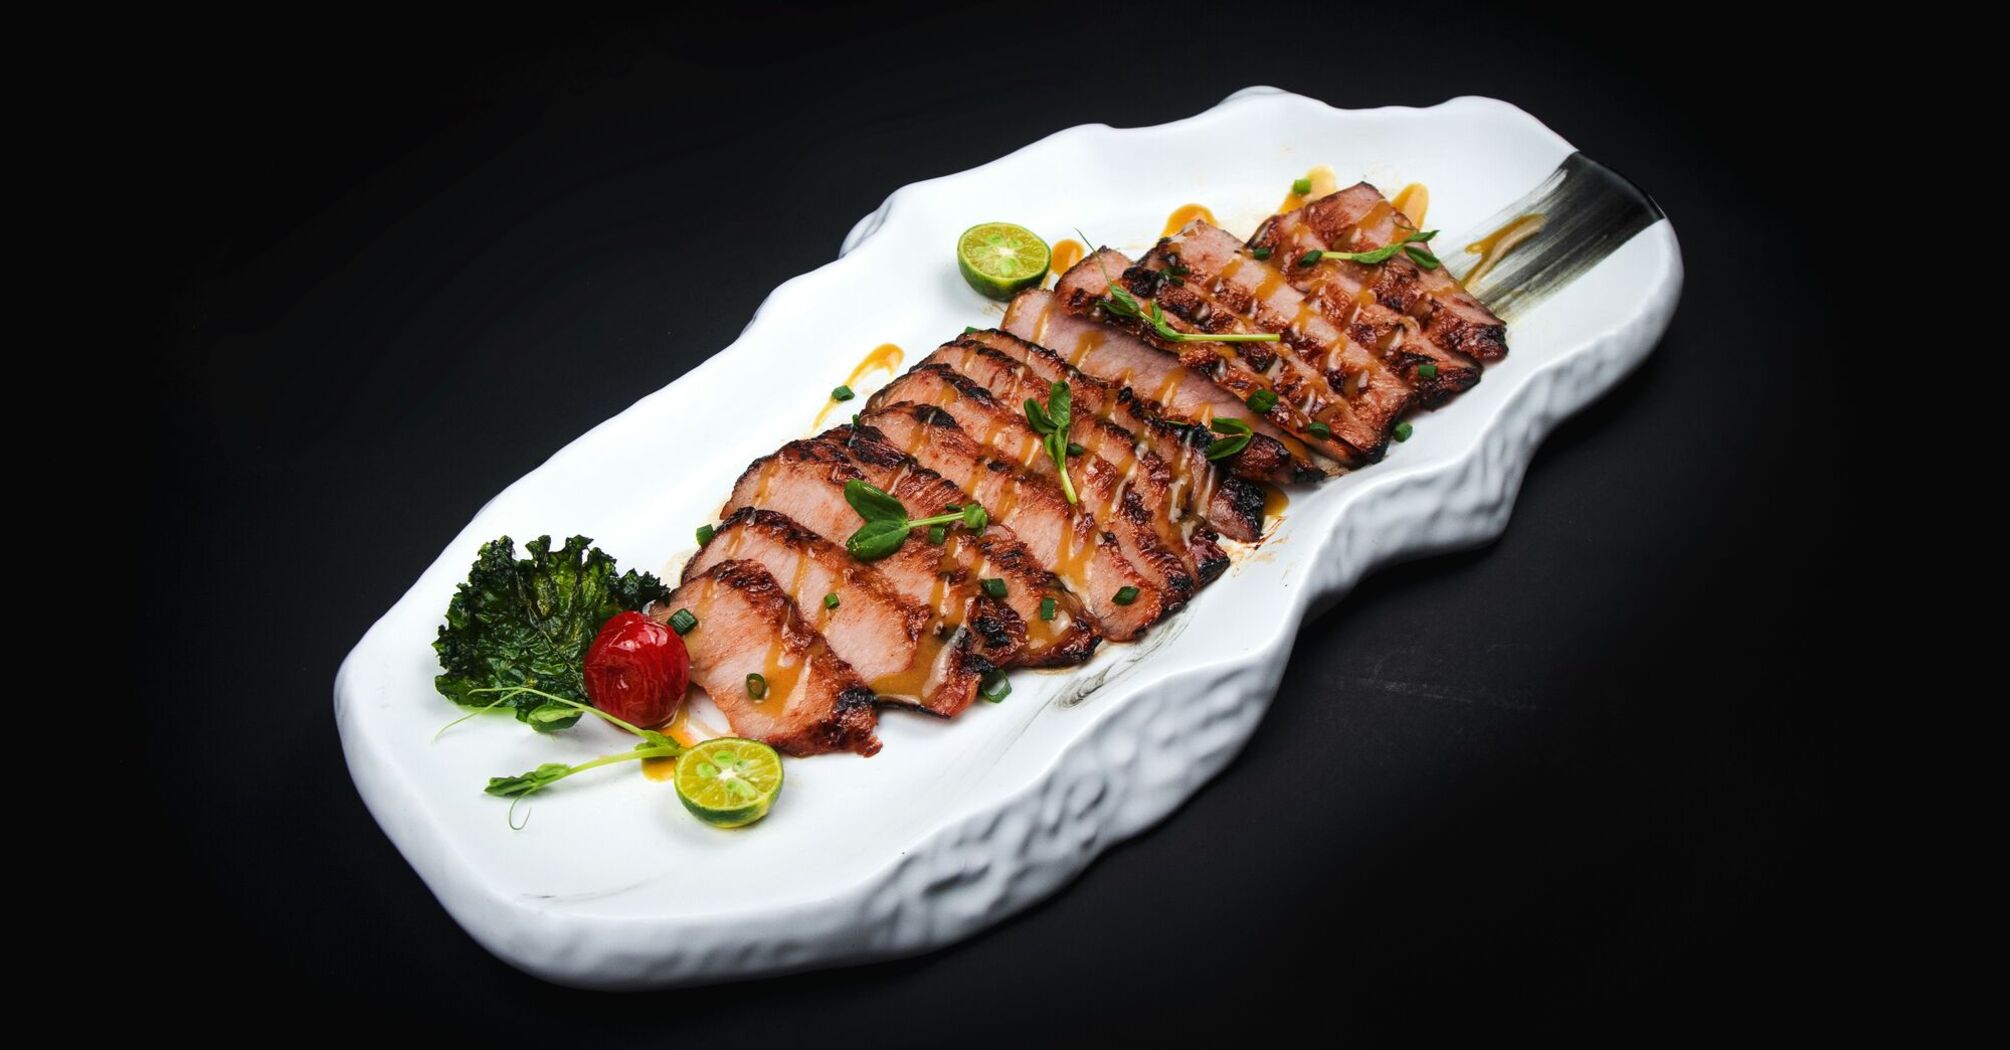 Sliced grilled pork on a white ceramic platter garnished with cherry tomatoes, kale, and lime 